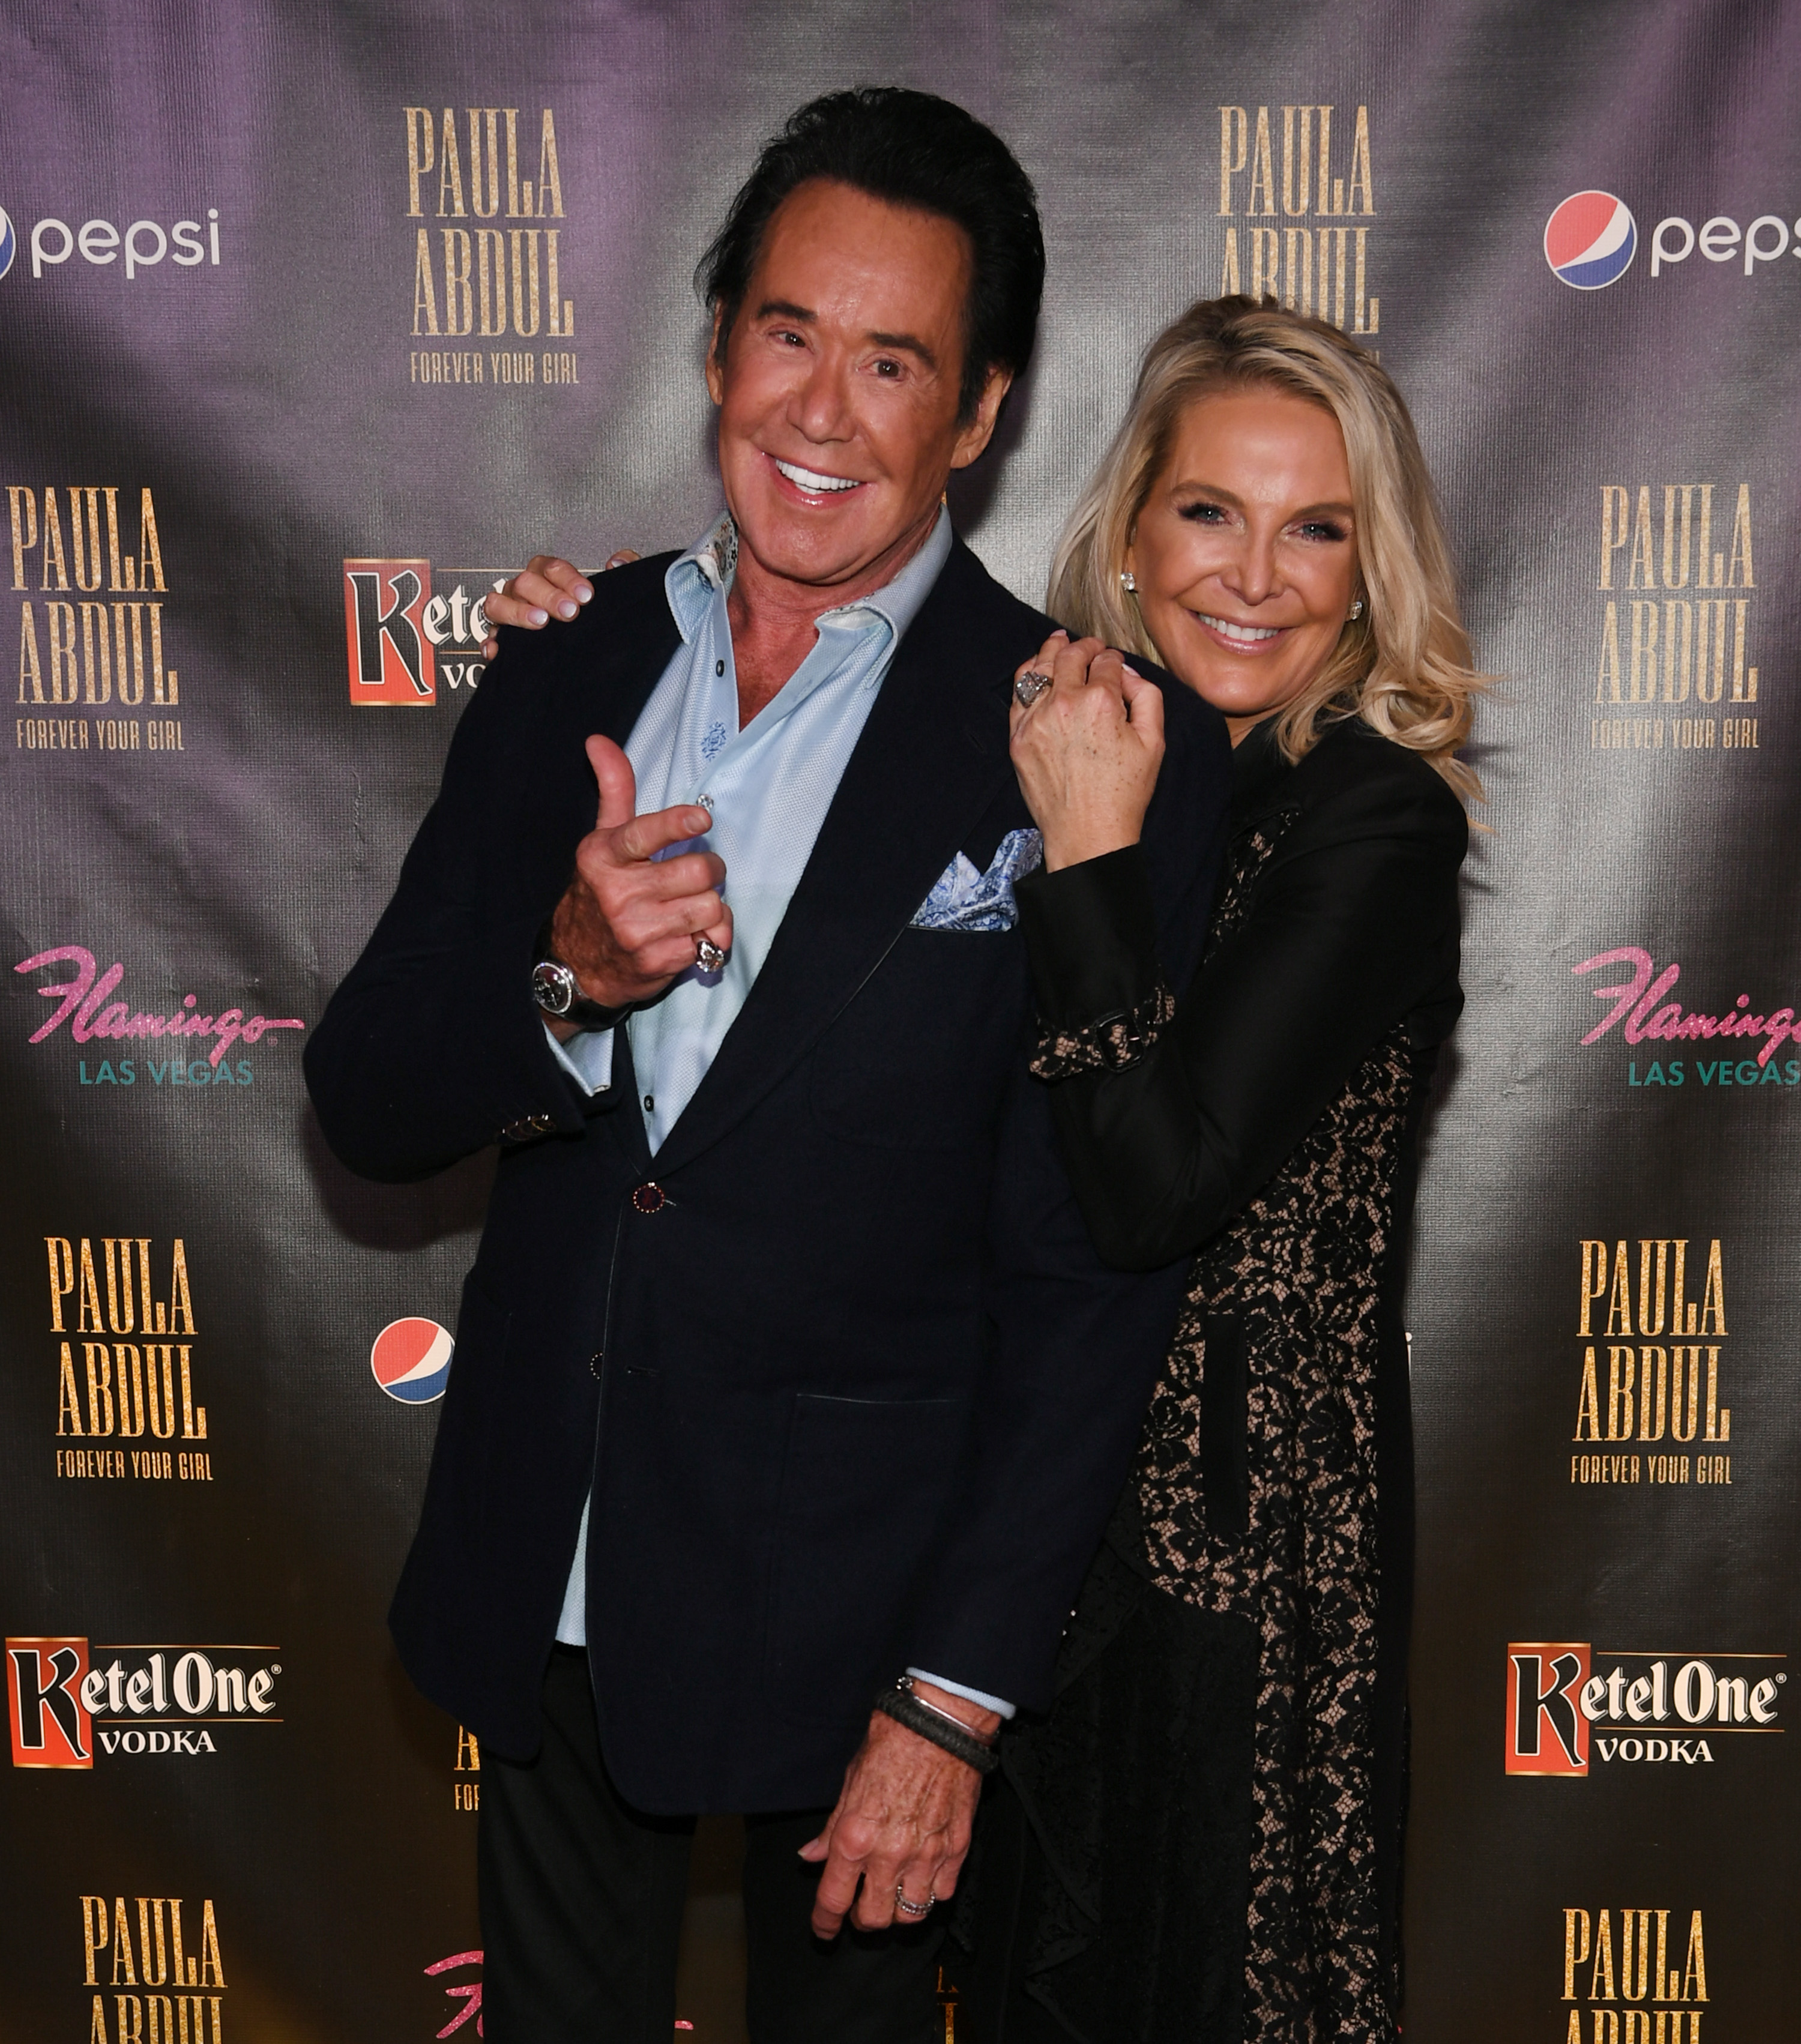 Wayne Newton and Kathleen McCrone at the opening of “Paula Abdul: Forever Your Girl” on October 24, 2019, in Las Vegas, Nevada | Source: Getty Images